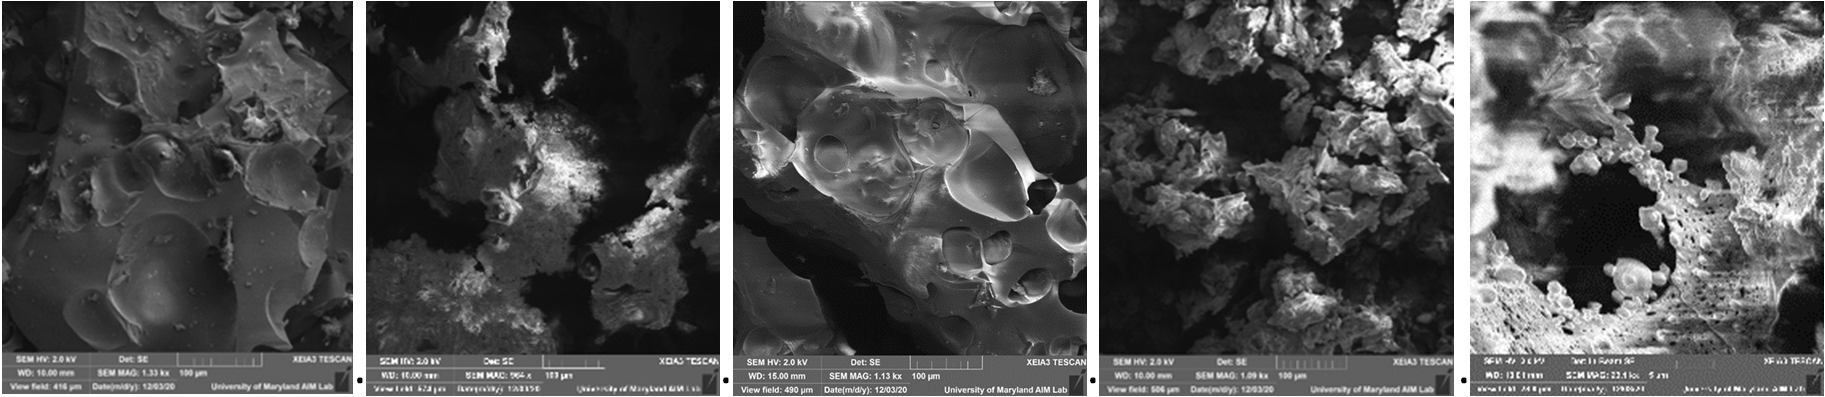 SEM images of the chars obtained from Supercritical CO2 carbonization (SCC) of cellulose at 523 and 623K, at residence times of 2 and 5 hours. (a) 523 K at 2 hrs, (b) 523 K for 5 hrs, (c) 623 K for 2 hrs, (d) 623 K for 5 hrs, and (e) 623 K for 5 hrs (magnified).